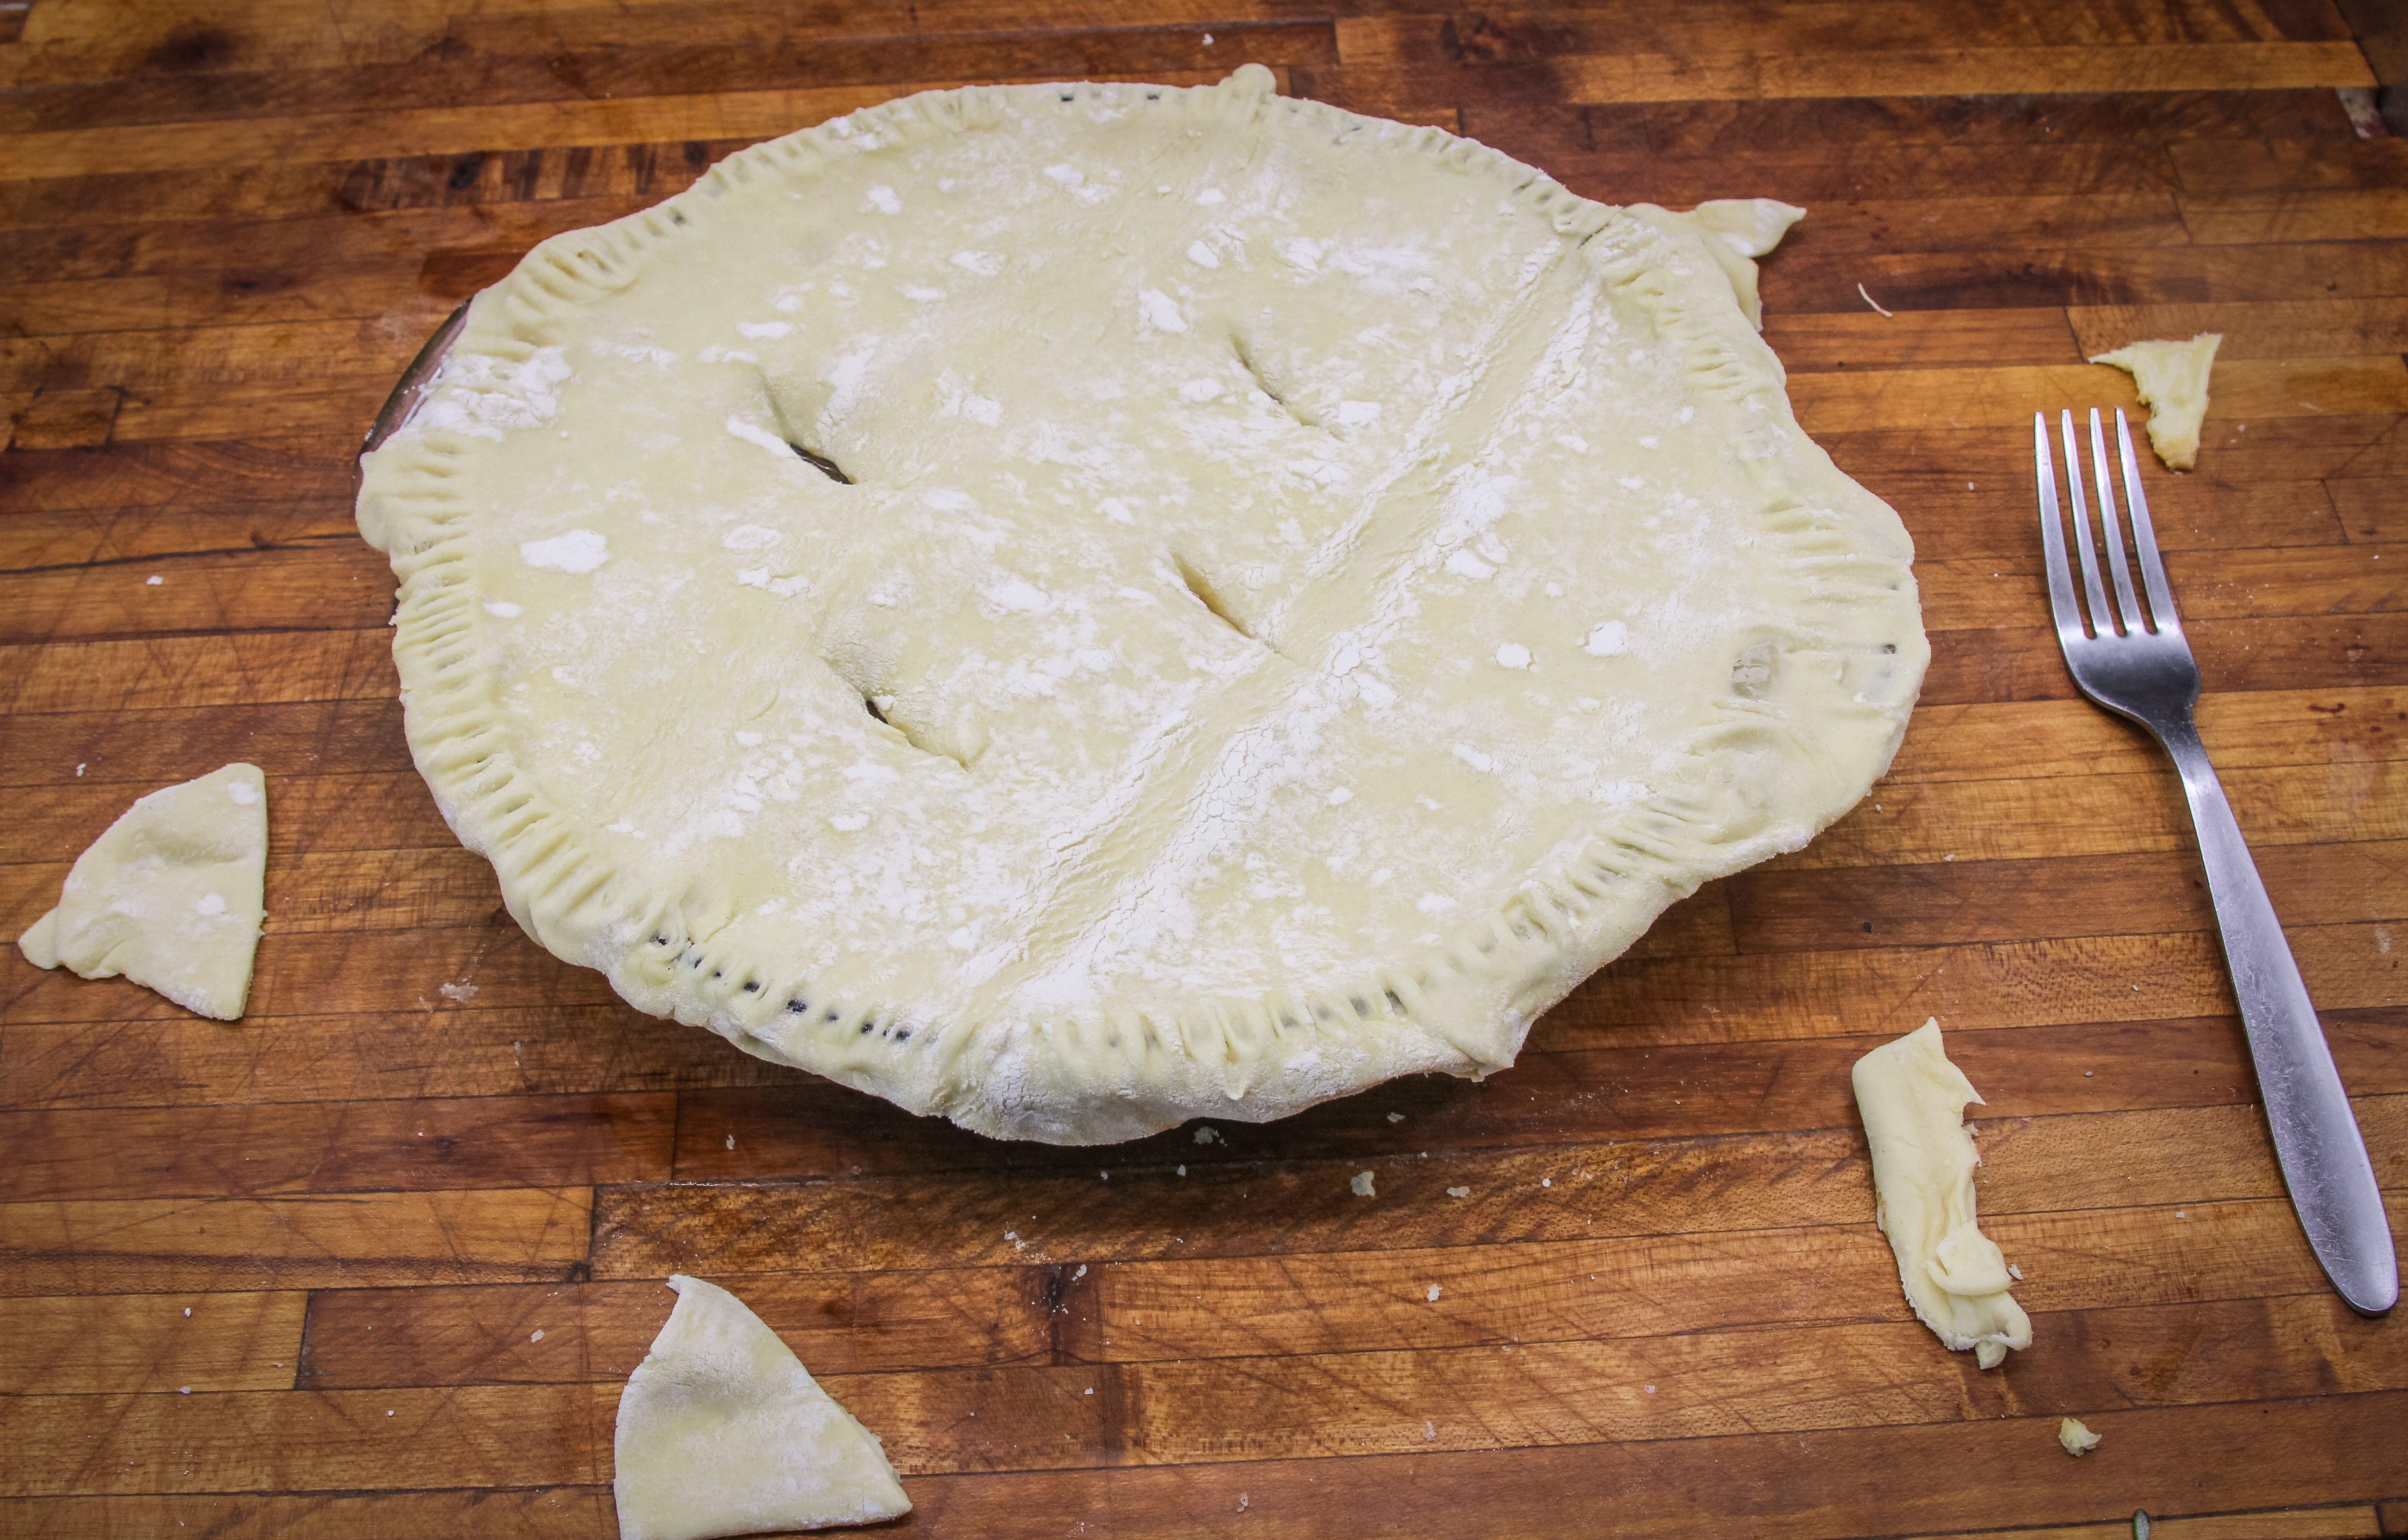 Top the pie with another sheet of puff pastry then crimp the edges with a fork.